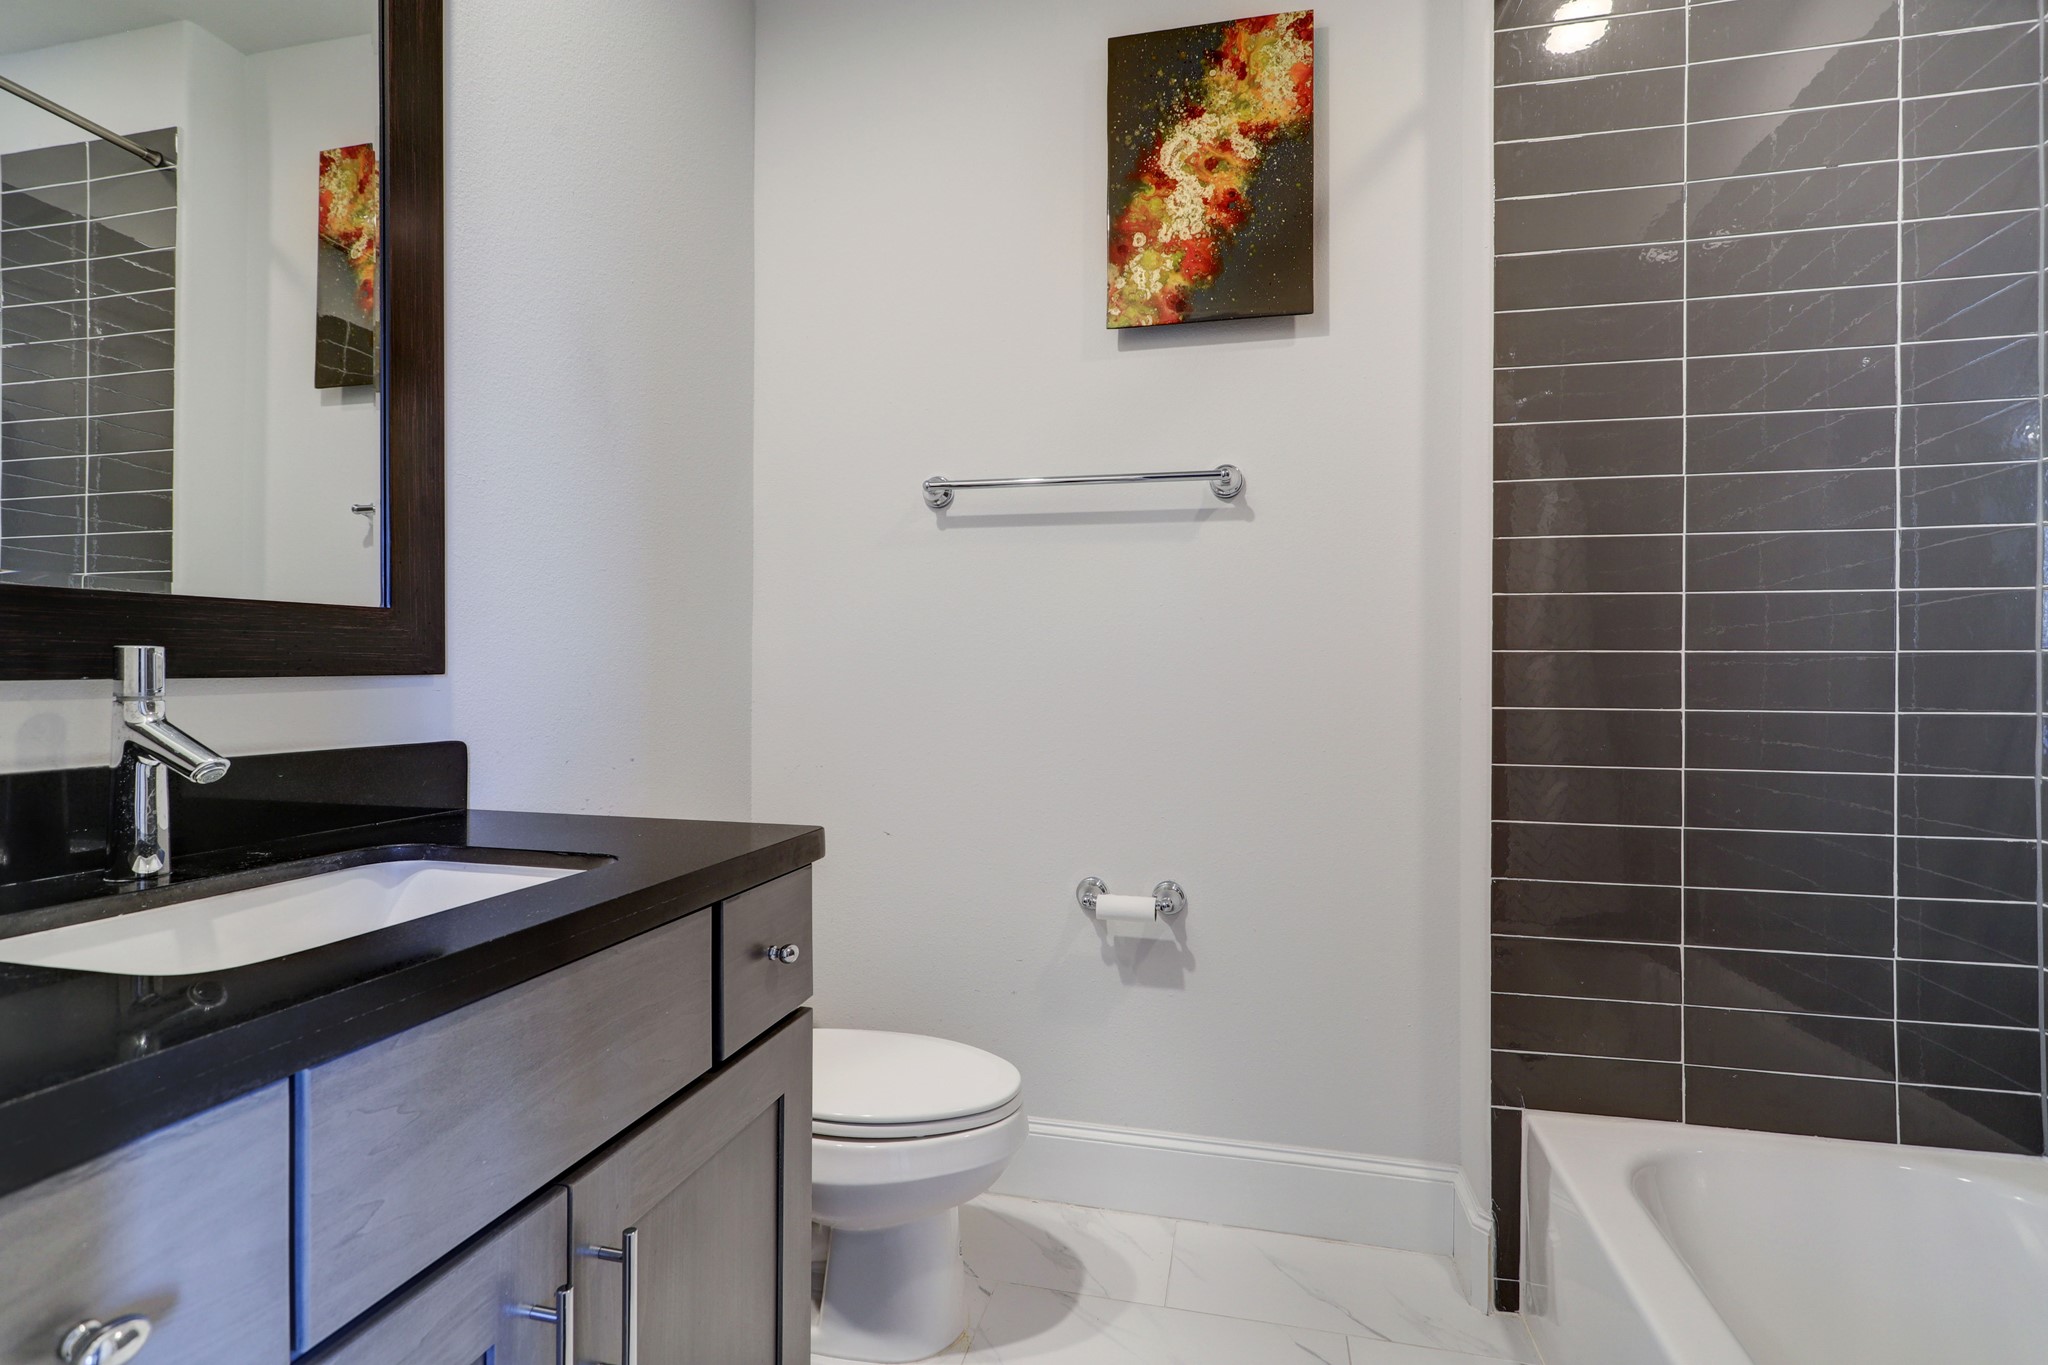 Attached full bathroom on the first floor has a combo shower/tub with sleek tile surround.